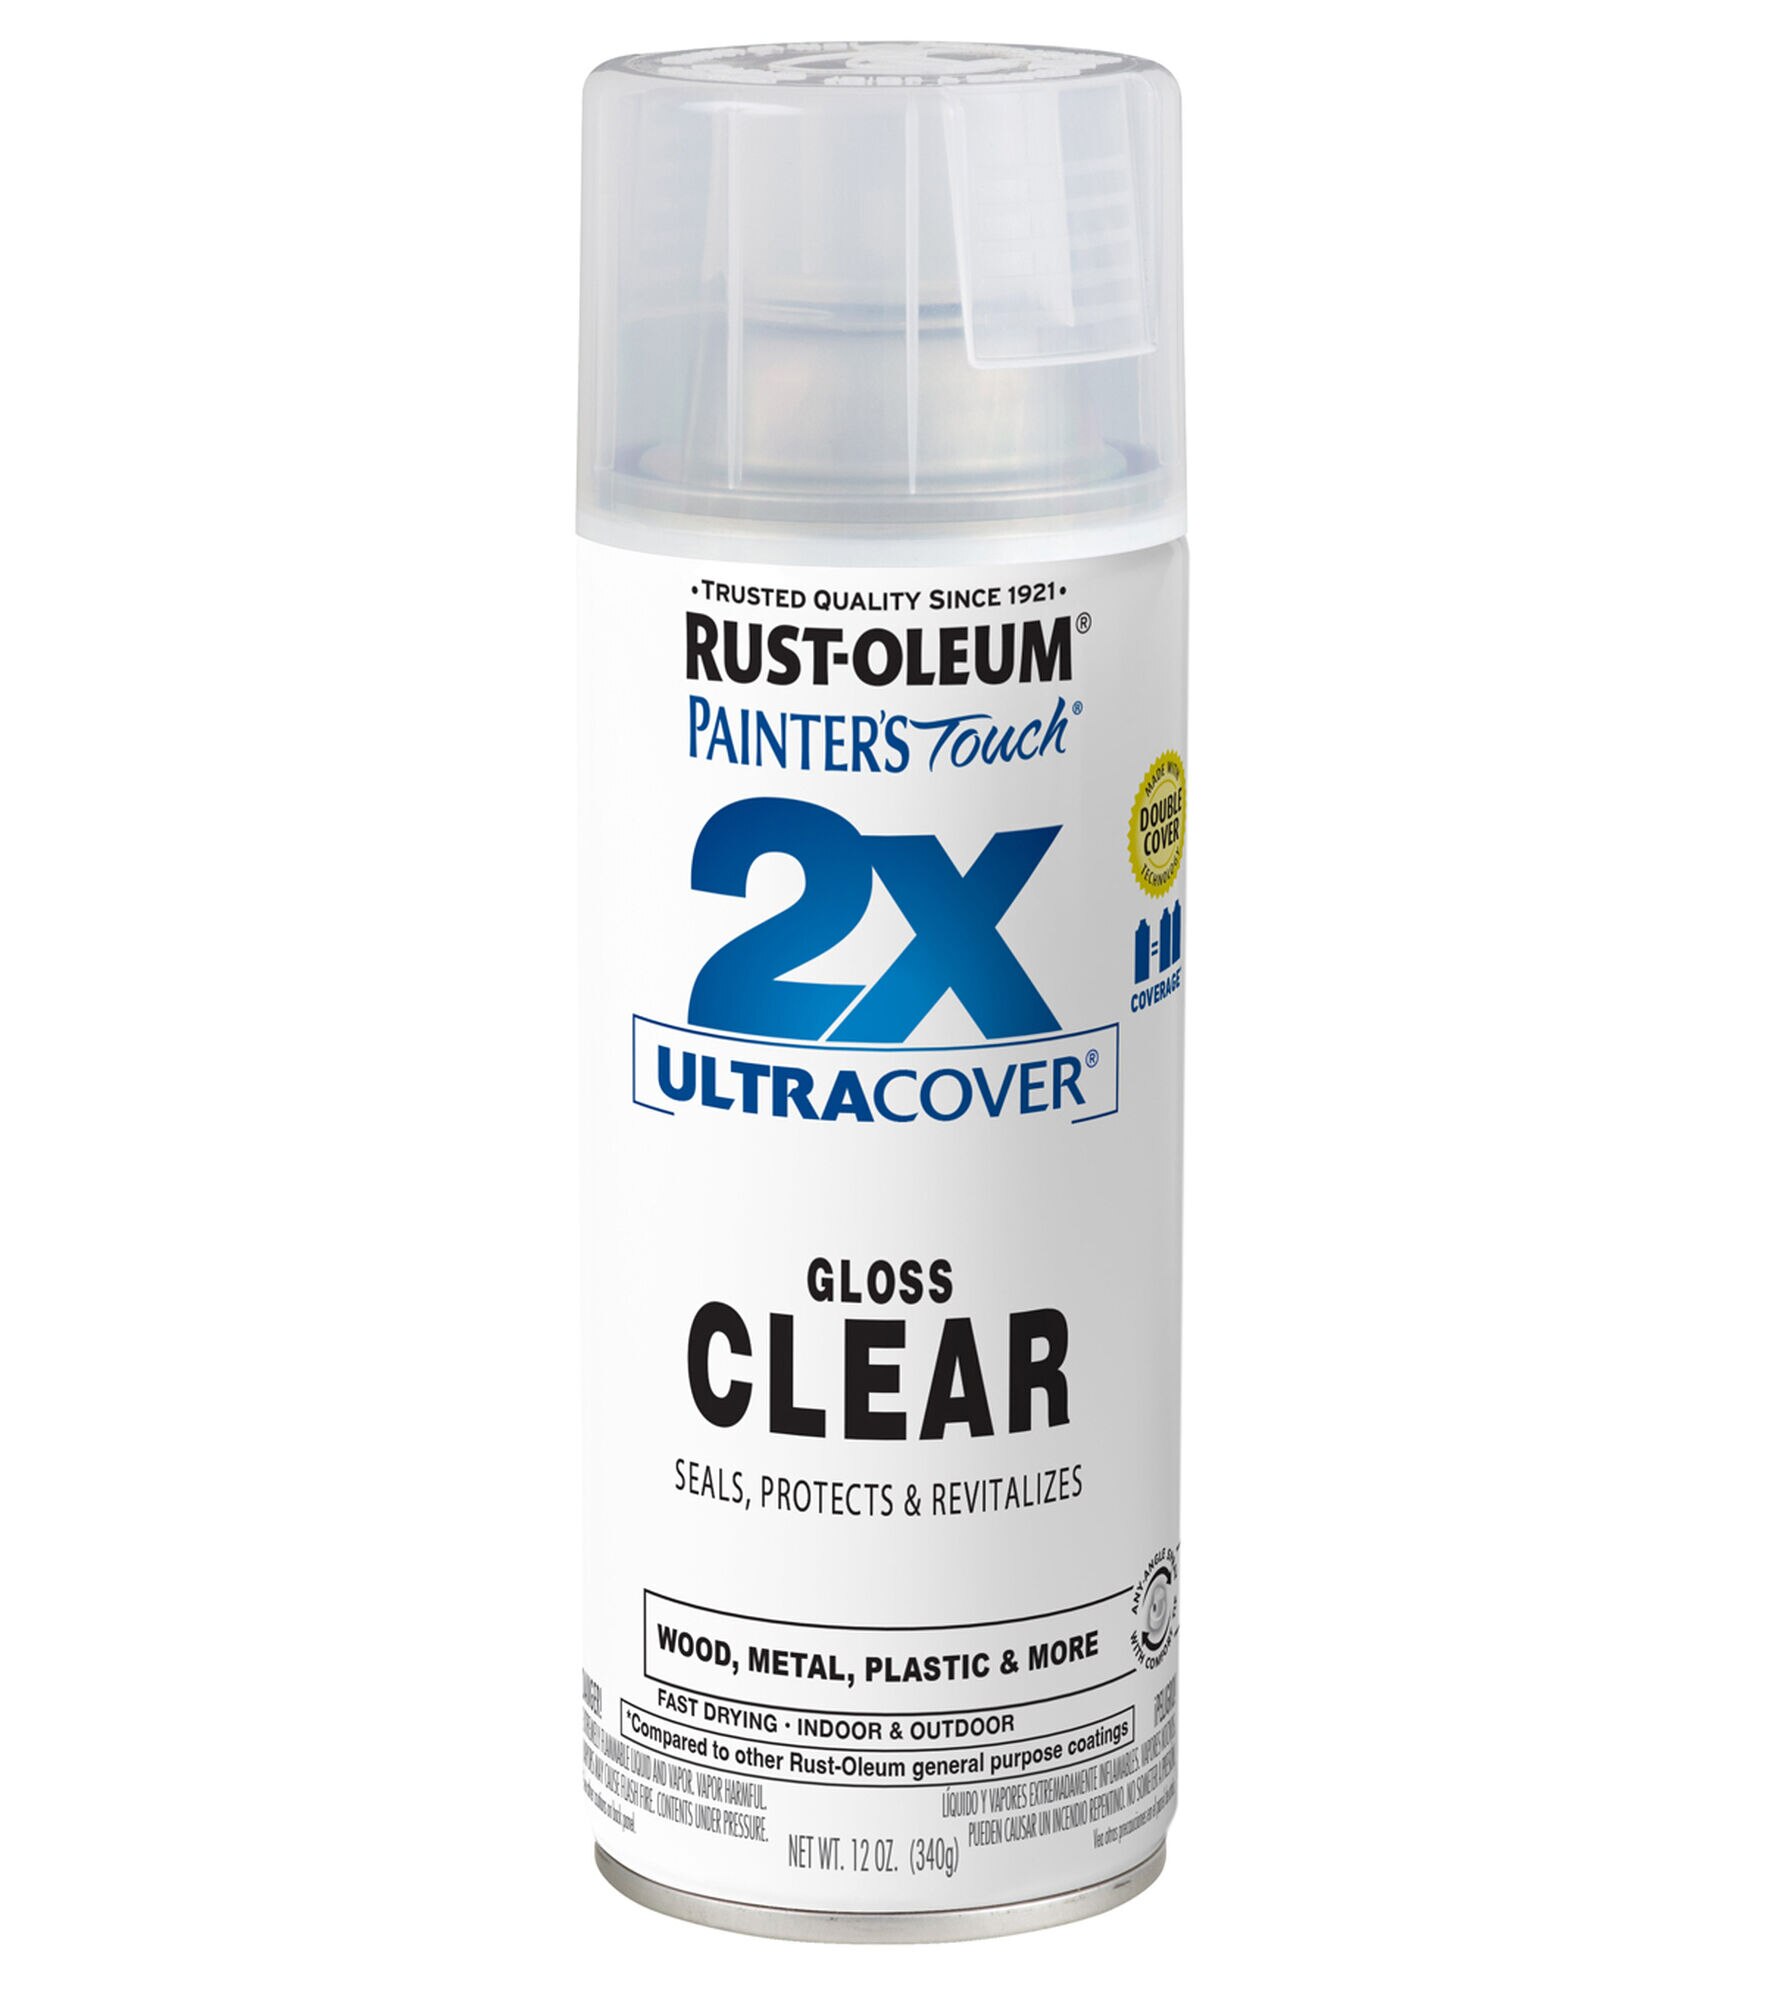 Rust-Oleum Painter's Touch Ultra Cover Gloss Clear Spray Paint 12